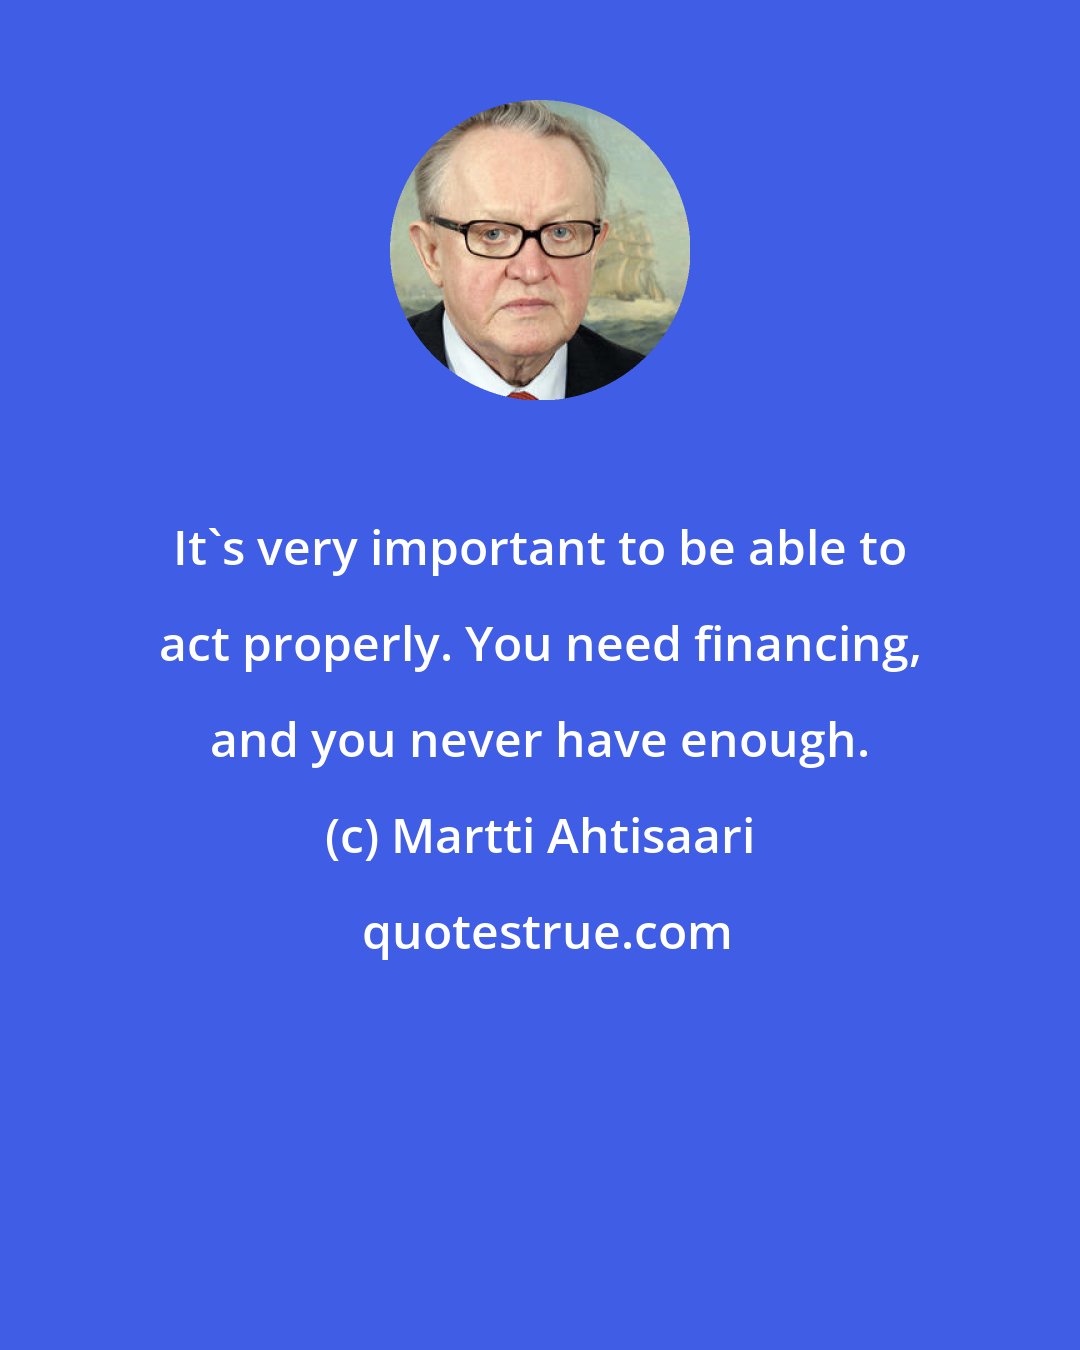 Martti Ahtisaari: It's very important to be able to act properly. You need financing, and you never have enough.